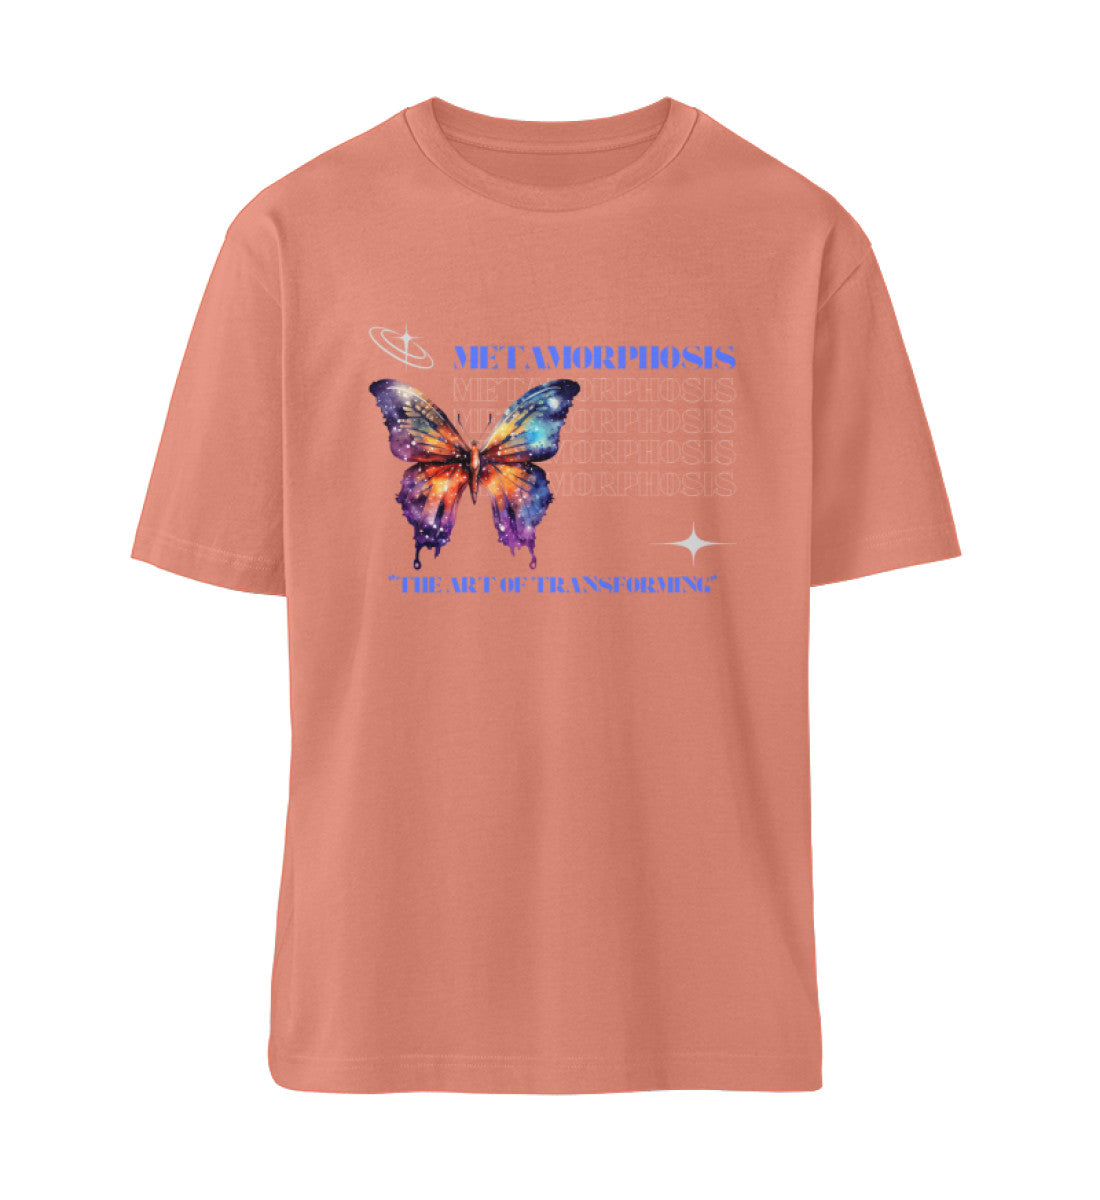 Unisex T-Shirt "BUTTERFLY" - Rose Clay